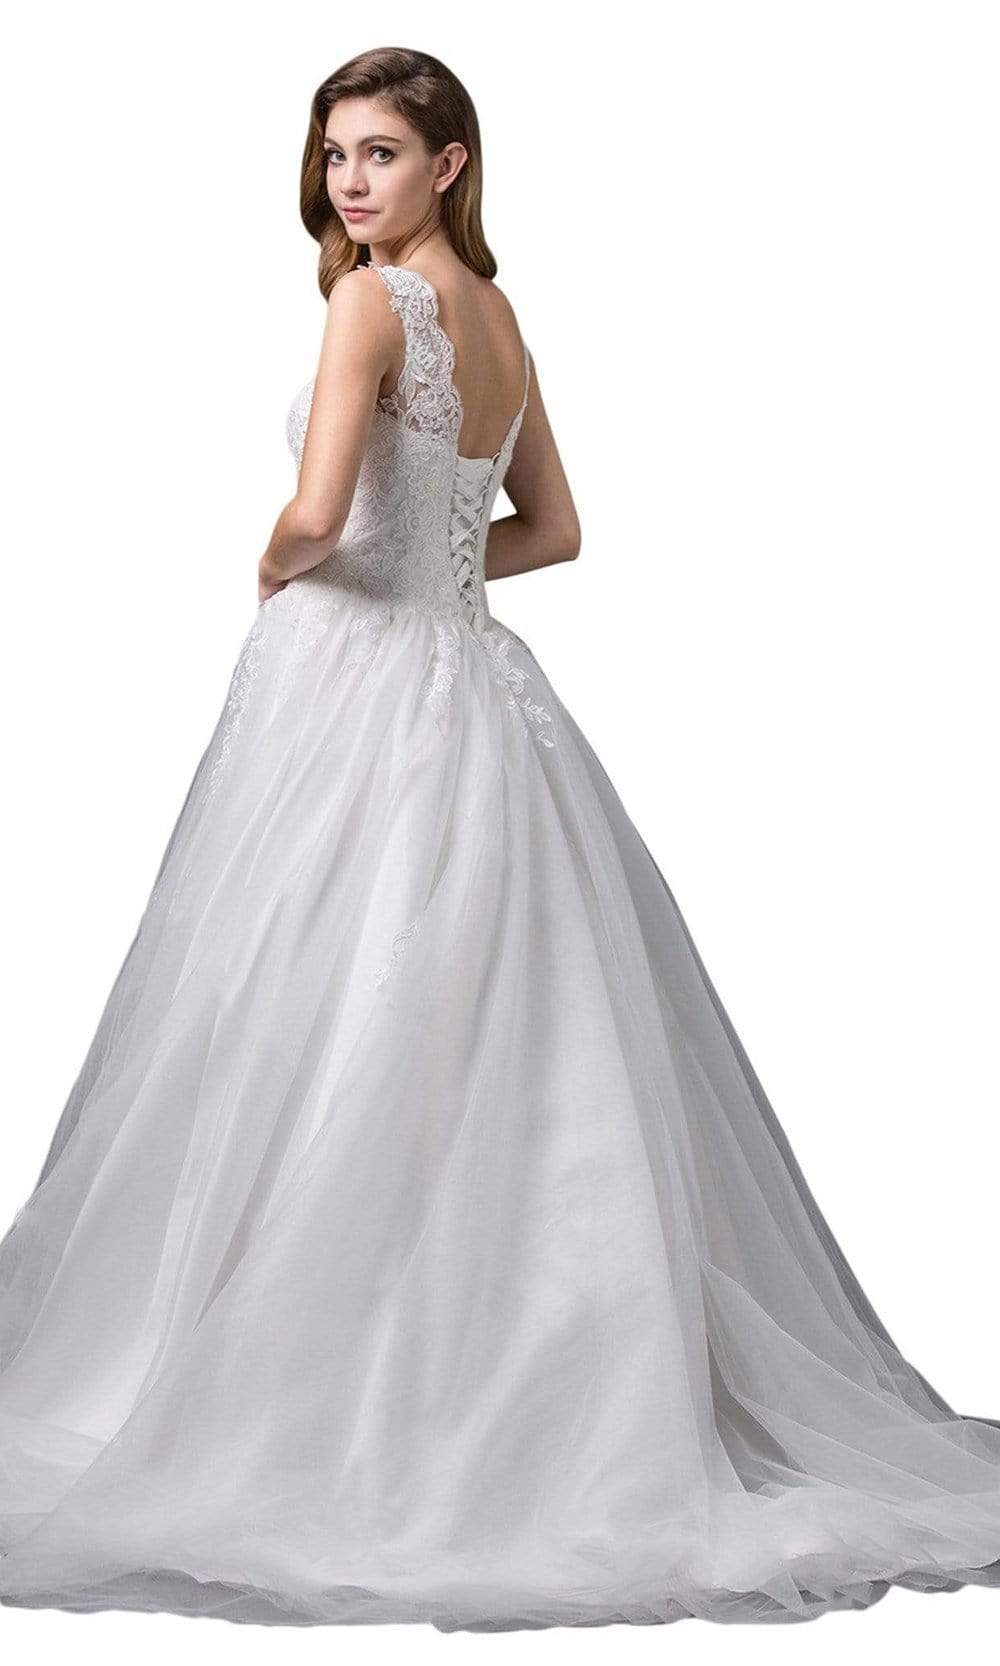 Dancing Queen Bridal - Scalloped V-Neck Lace Up Back Embellished Ballgown 71SC In White